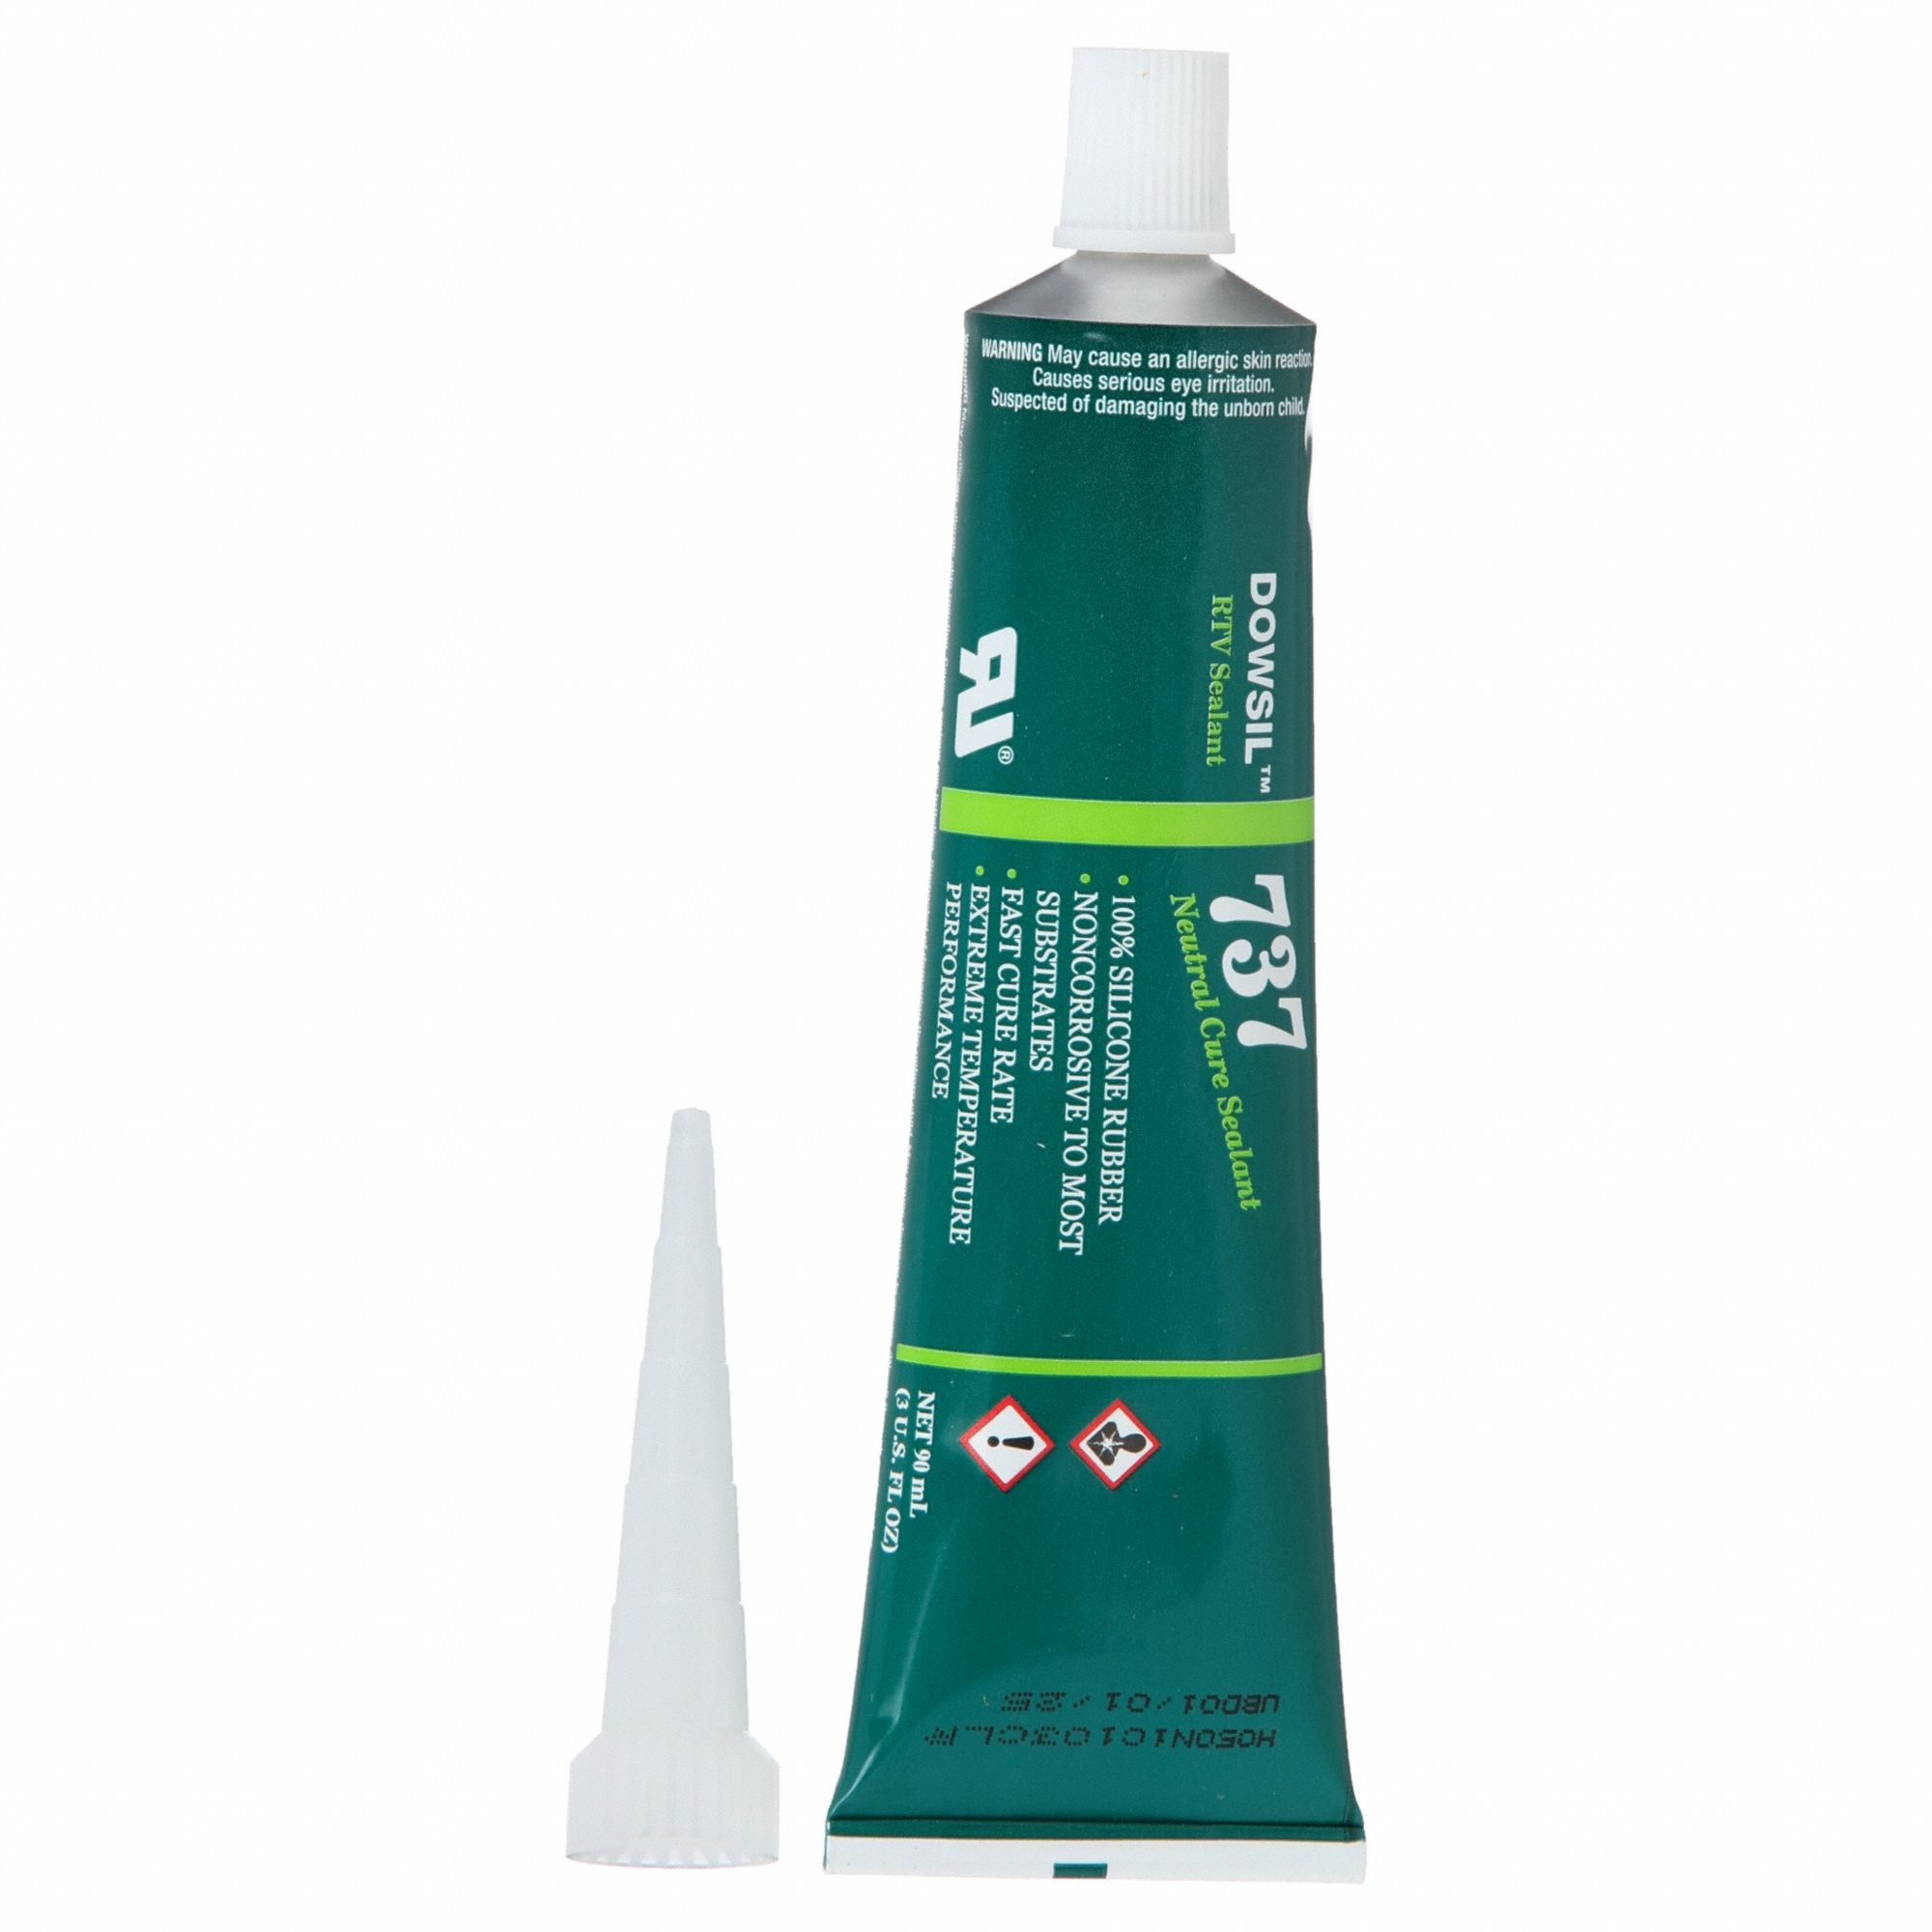 Dow Corning - Molykote 316 Silicone Release Agent, 10oz – Pilots HQ LLC.